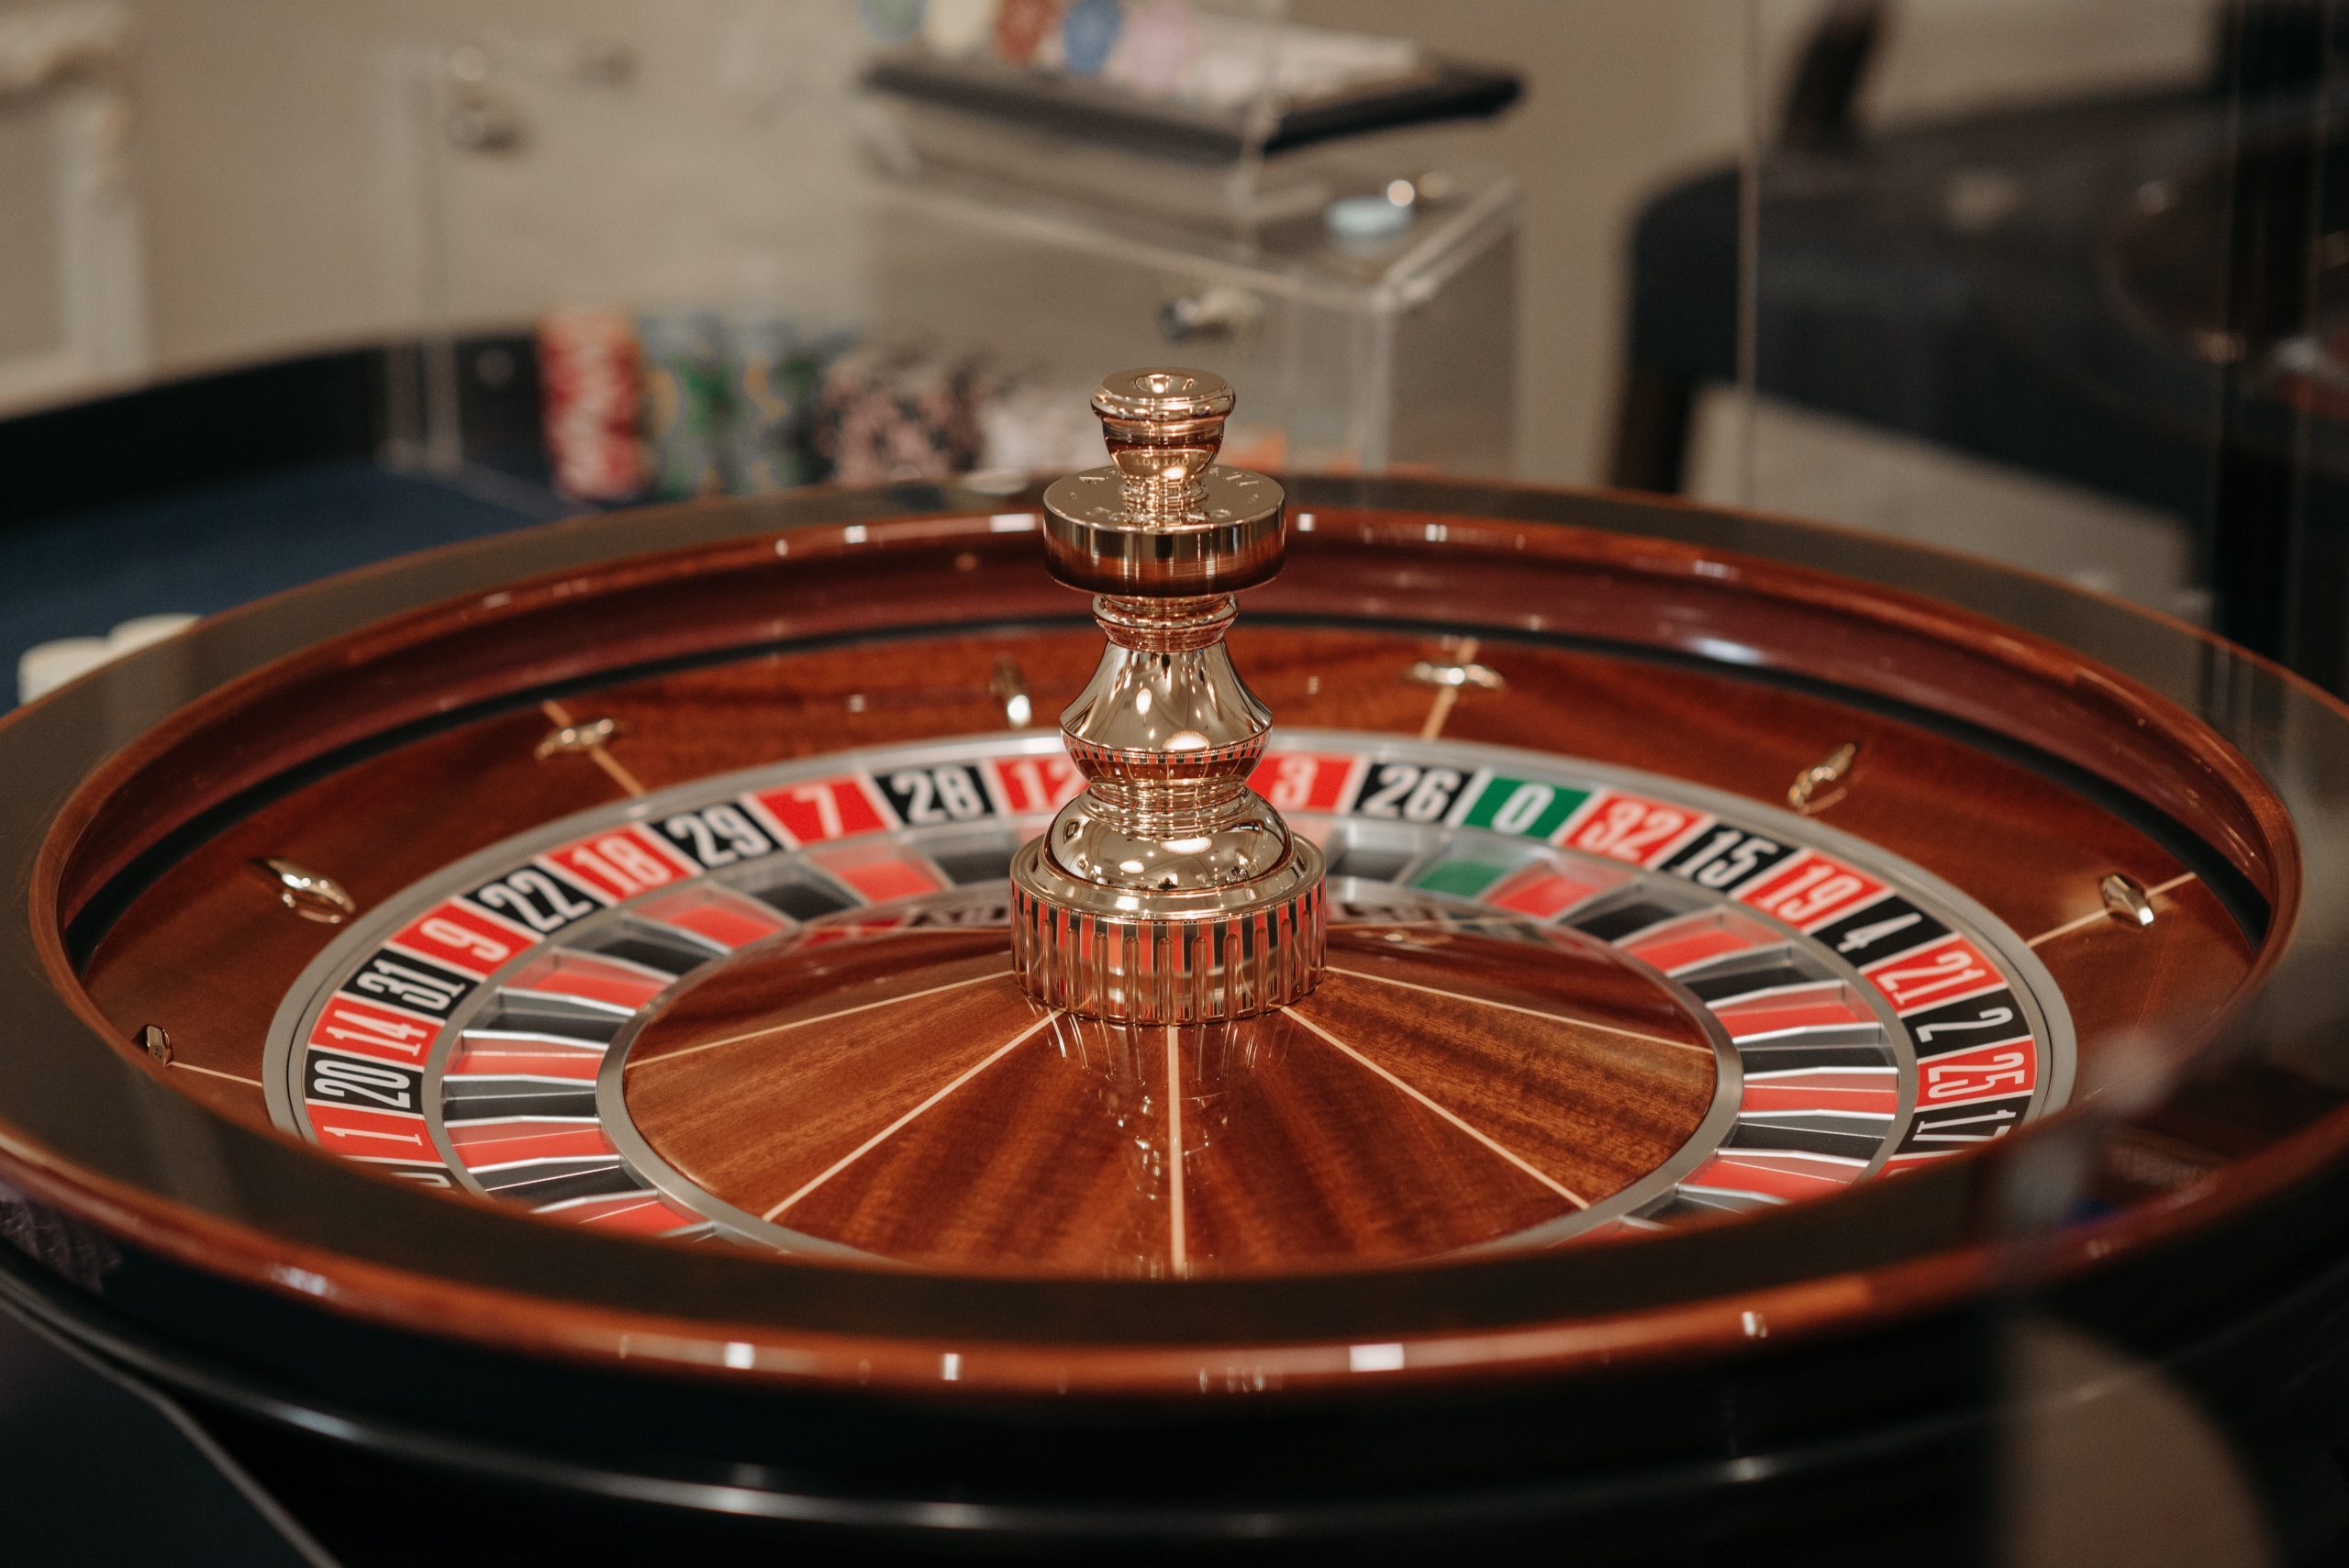 In an article about social casinos, a roulette wheel.